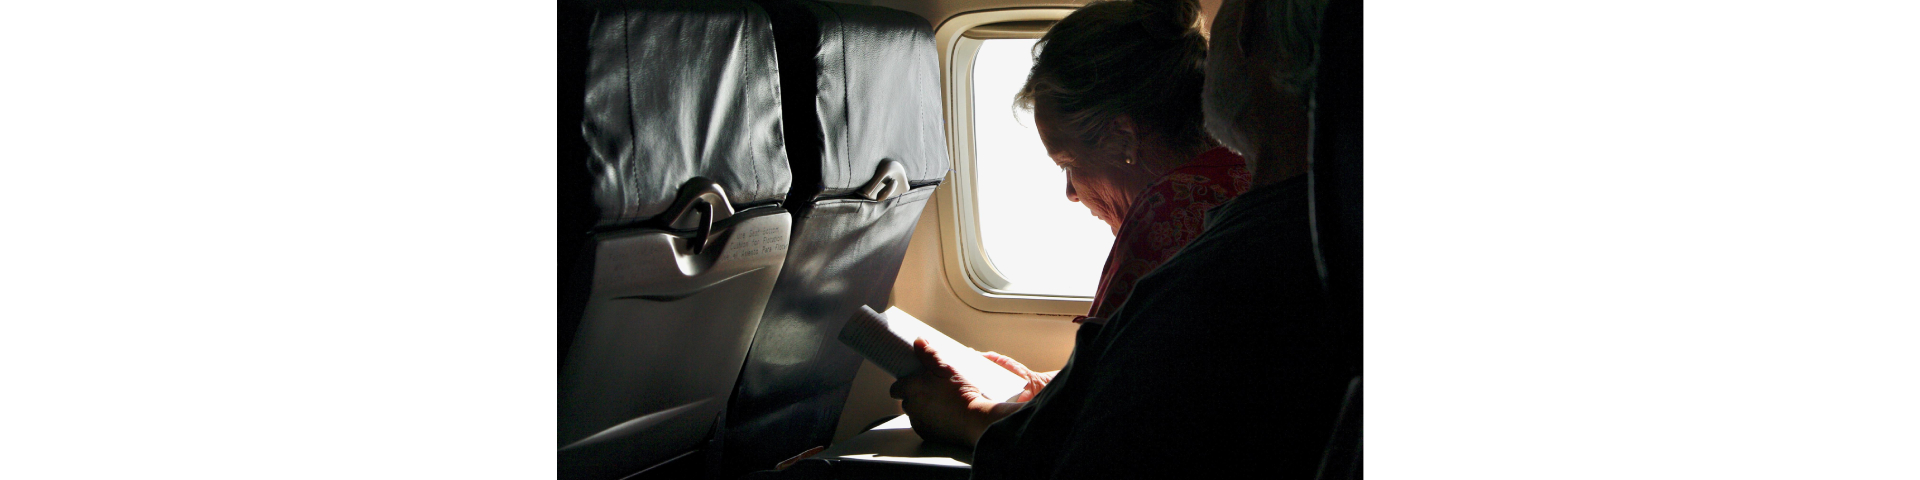 an image of a woman reading a book